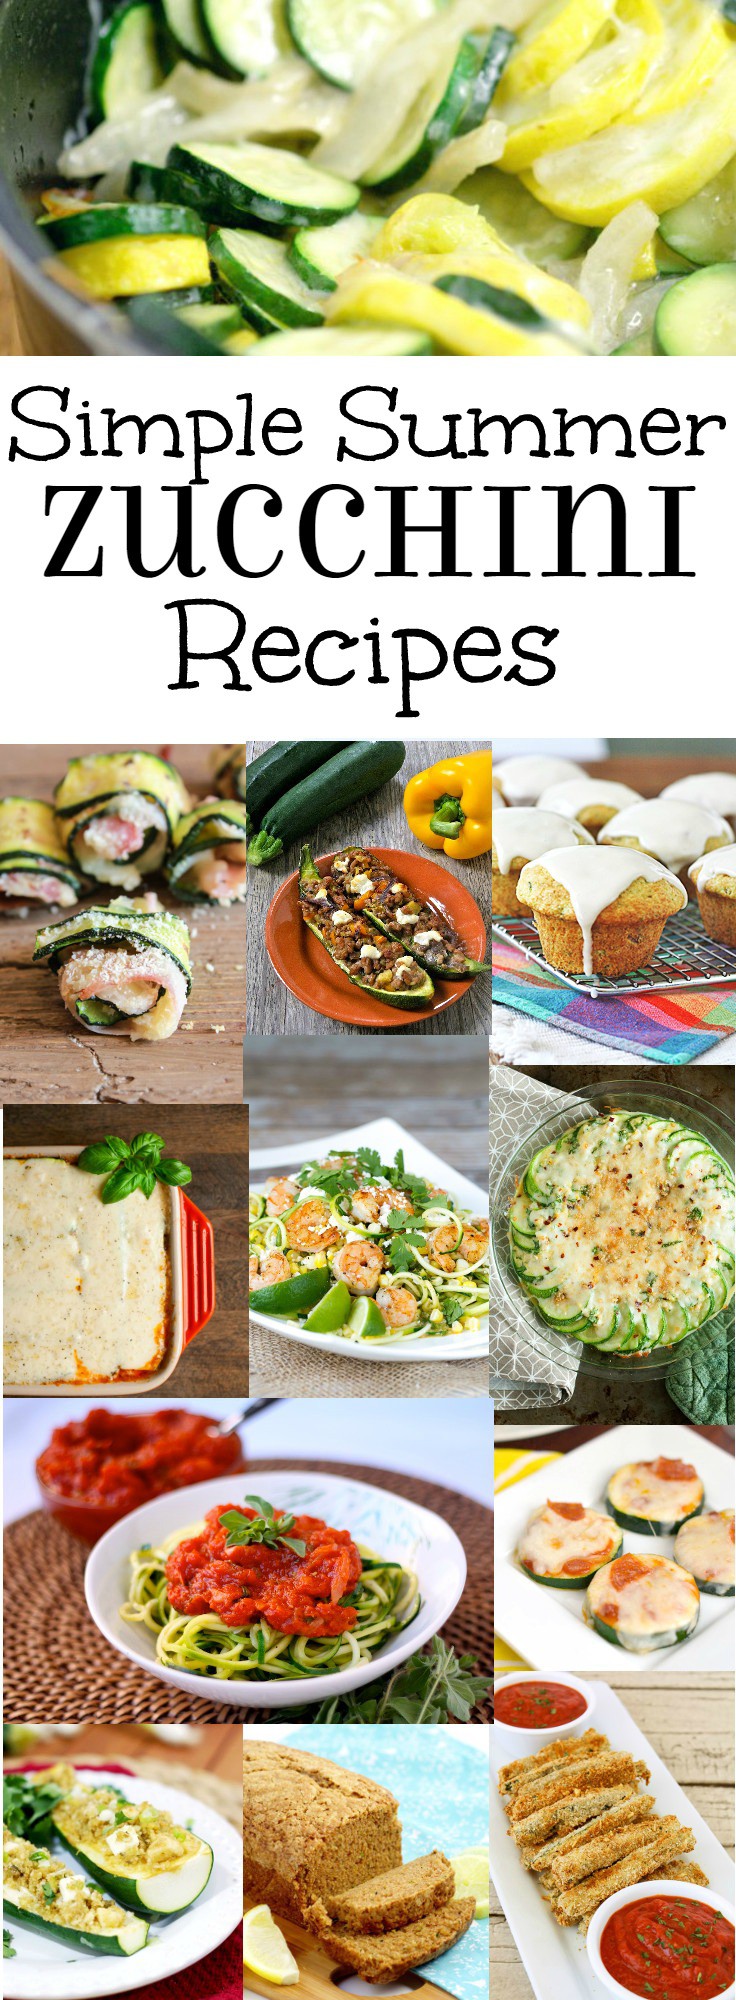 Over 40 easy and Simple Zucchini Recipes perfect for using up your garden fresh zucchini this Summer. From sweet to savory and cheesy to fresh, this simple zucchini recipes list has it all! These are such great quick and easy summer side dishes recipes!